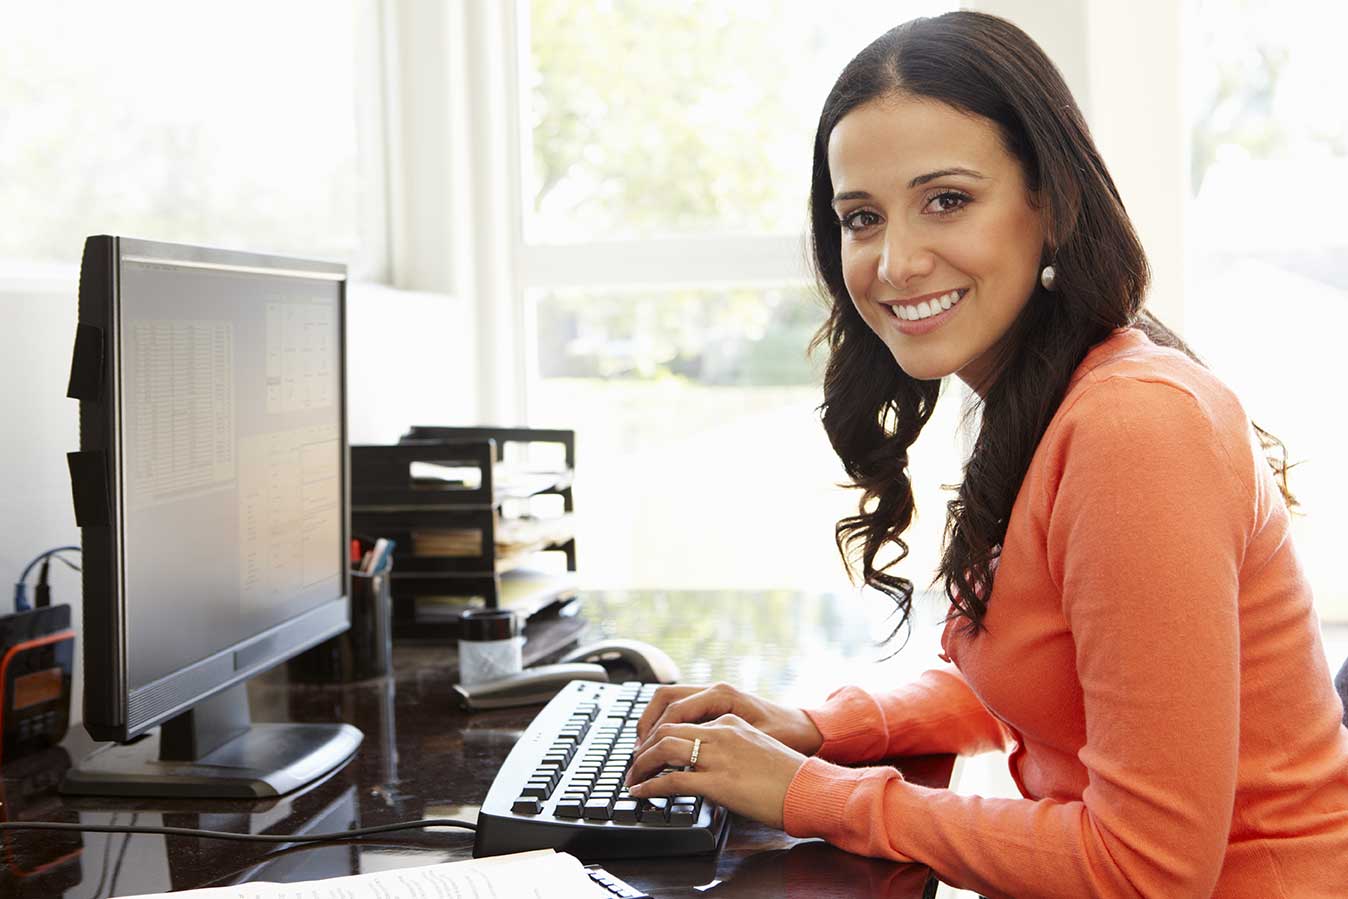 Hispanic woman searching for work online | Job Search Trends West Michigan